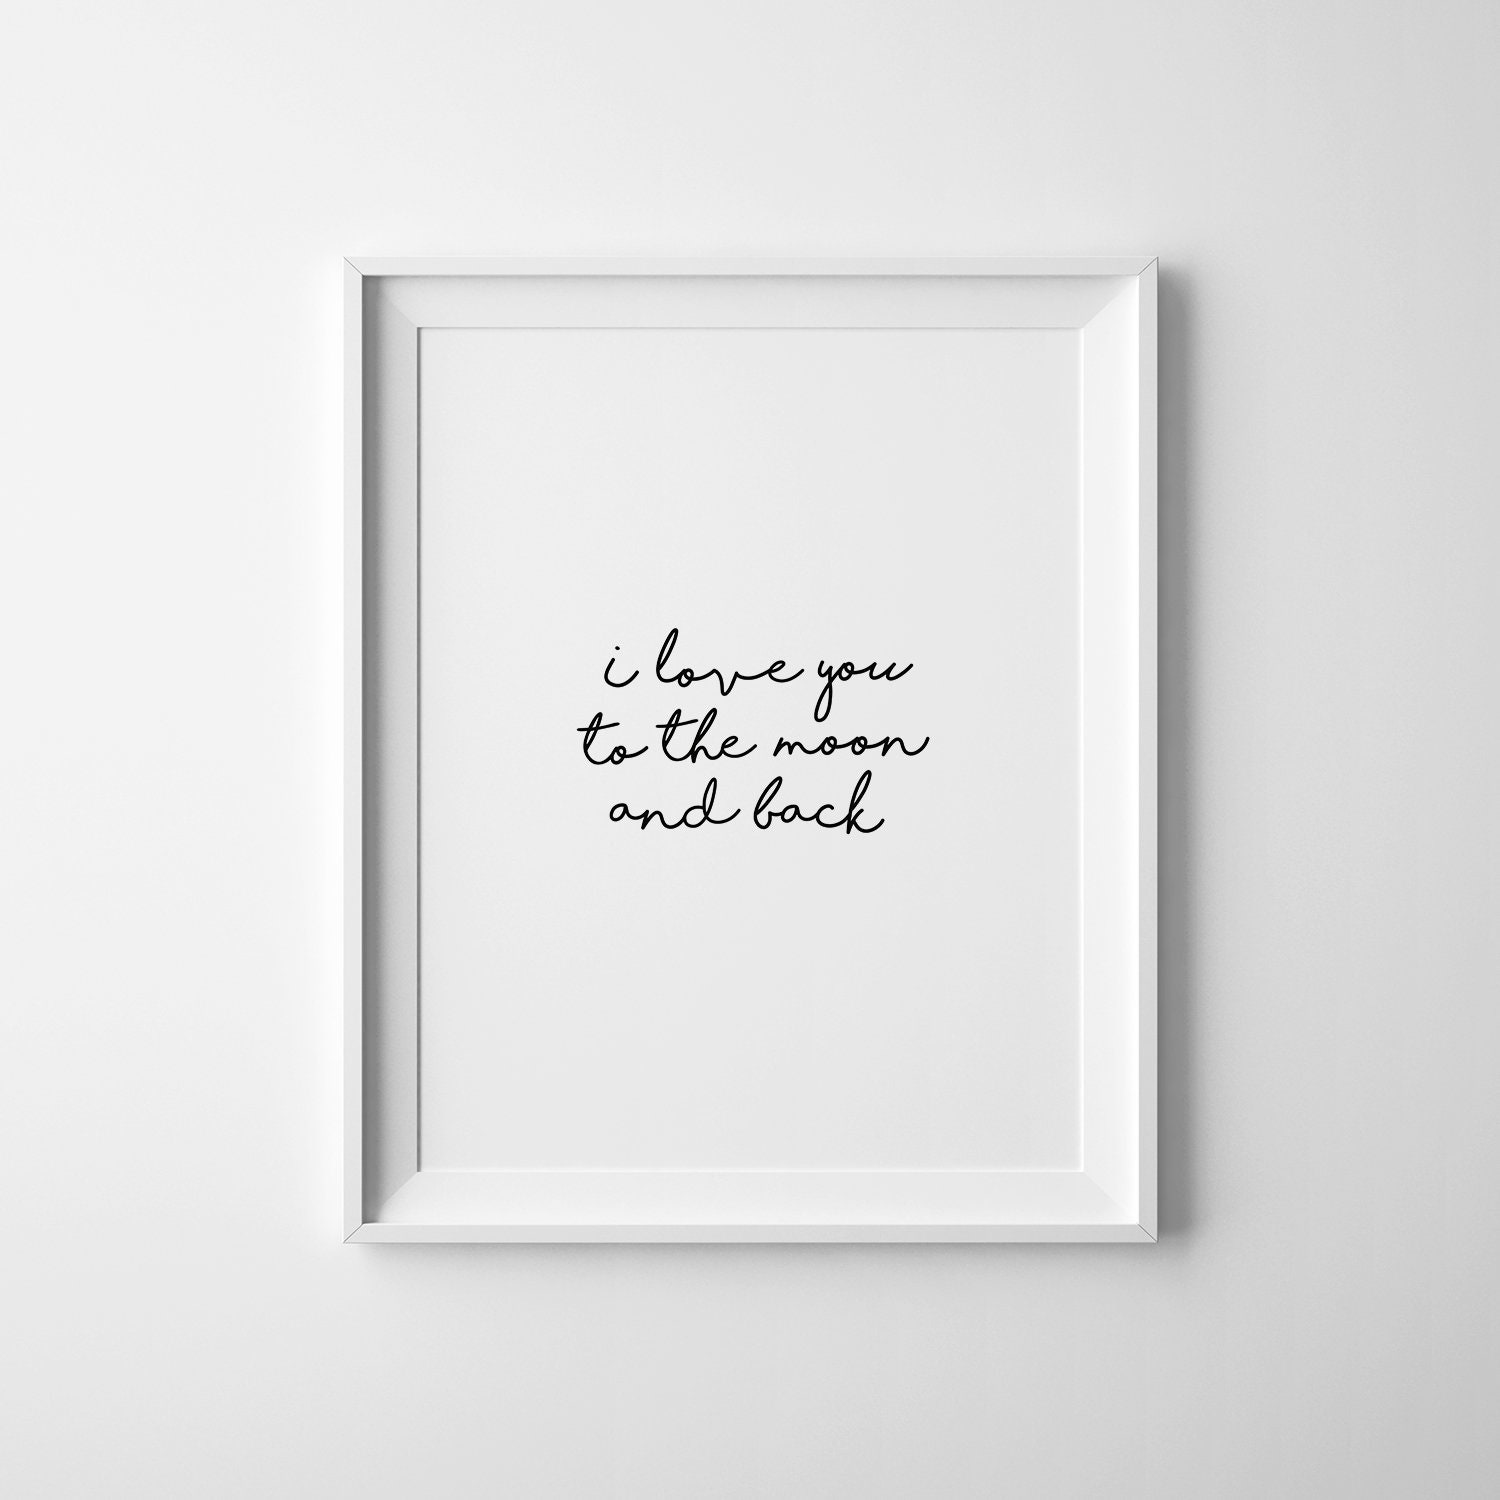 the dark white moon, moon quotes, wall poster, romantic poster